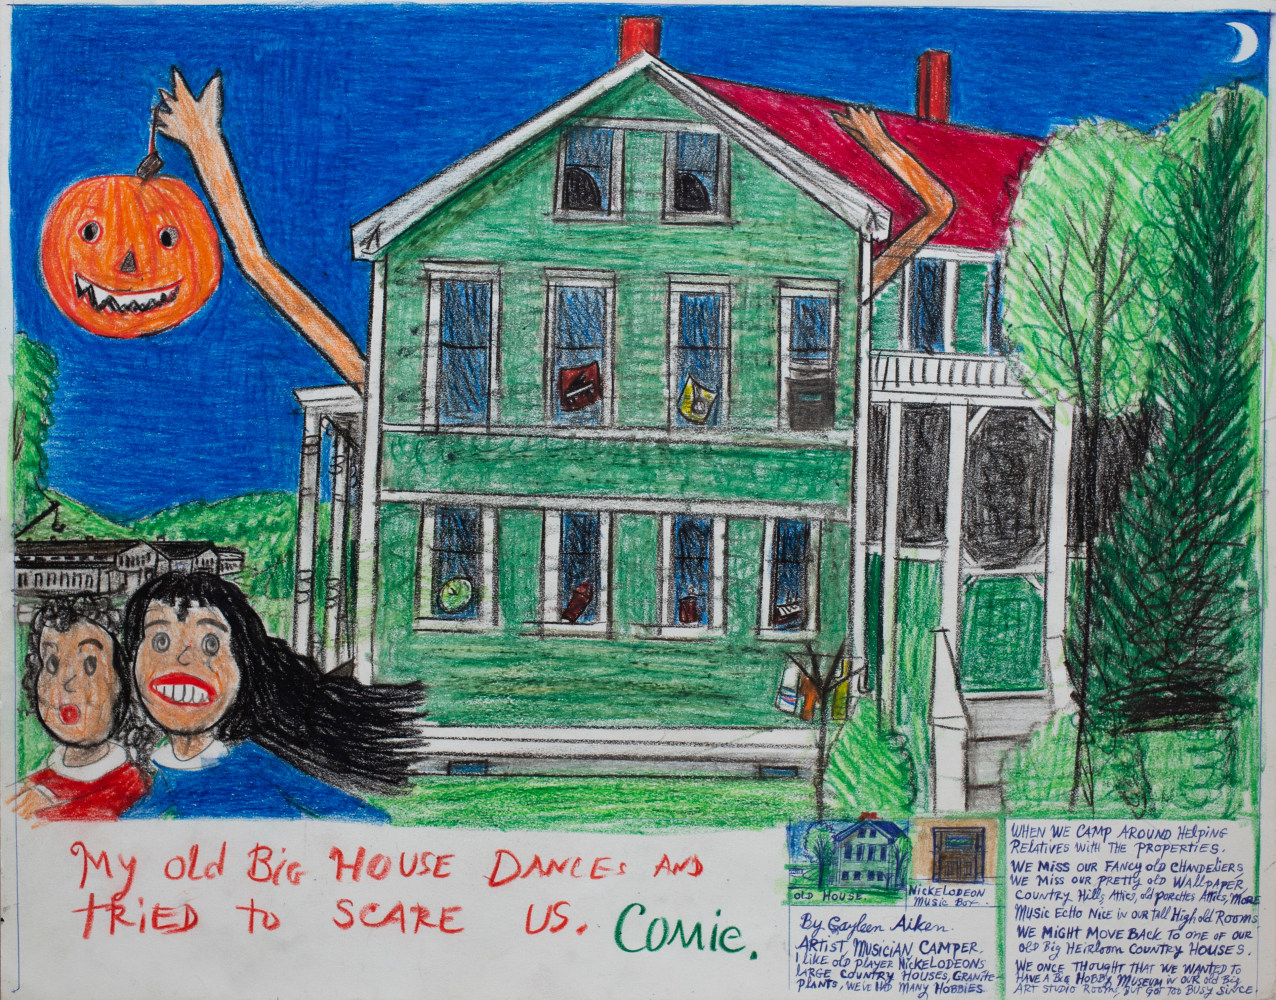 My old Big House Dances and tried to scare us, 1989
Colored pencil, ballpoint pen, and crayon on paper
11 x 14 inches